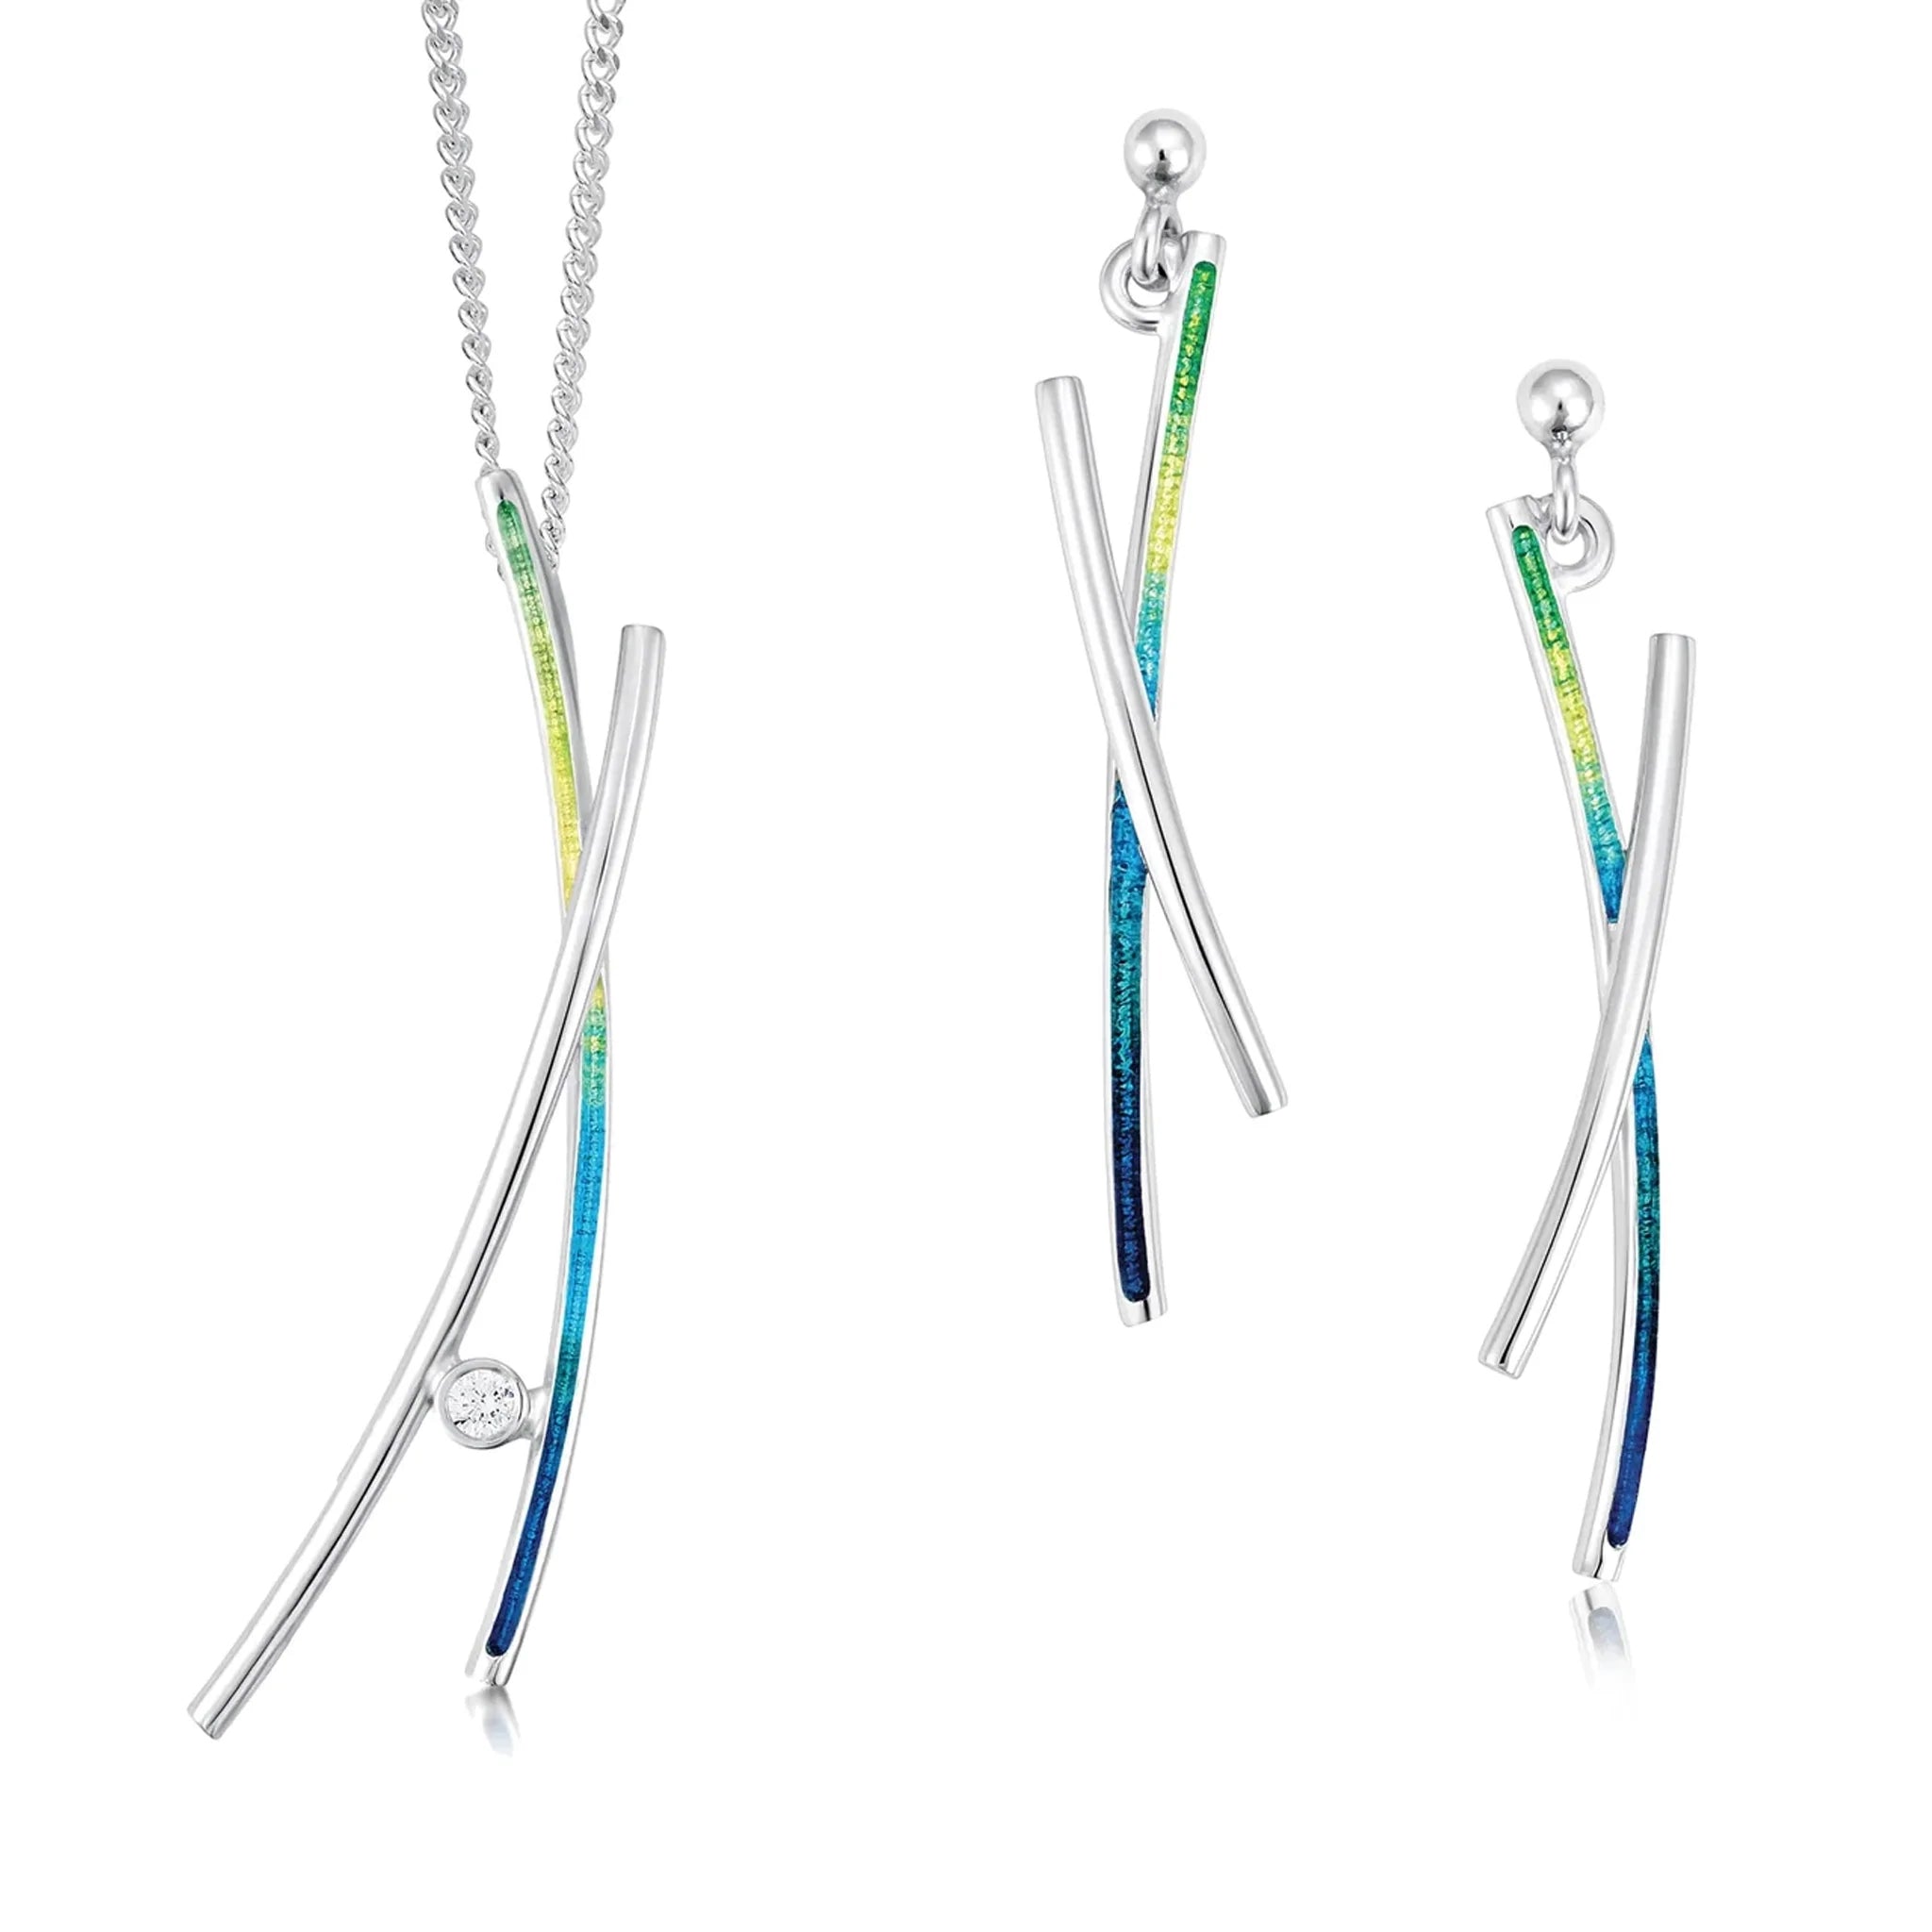 A set of wild grasses pieces by sheila fleet in green and blue enamel and silver